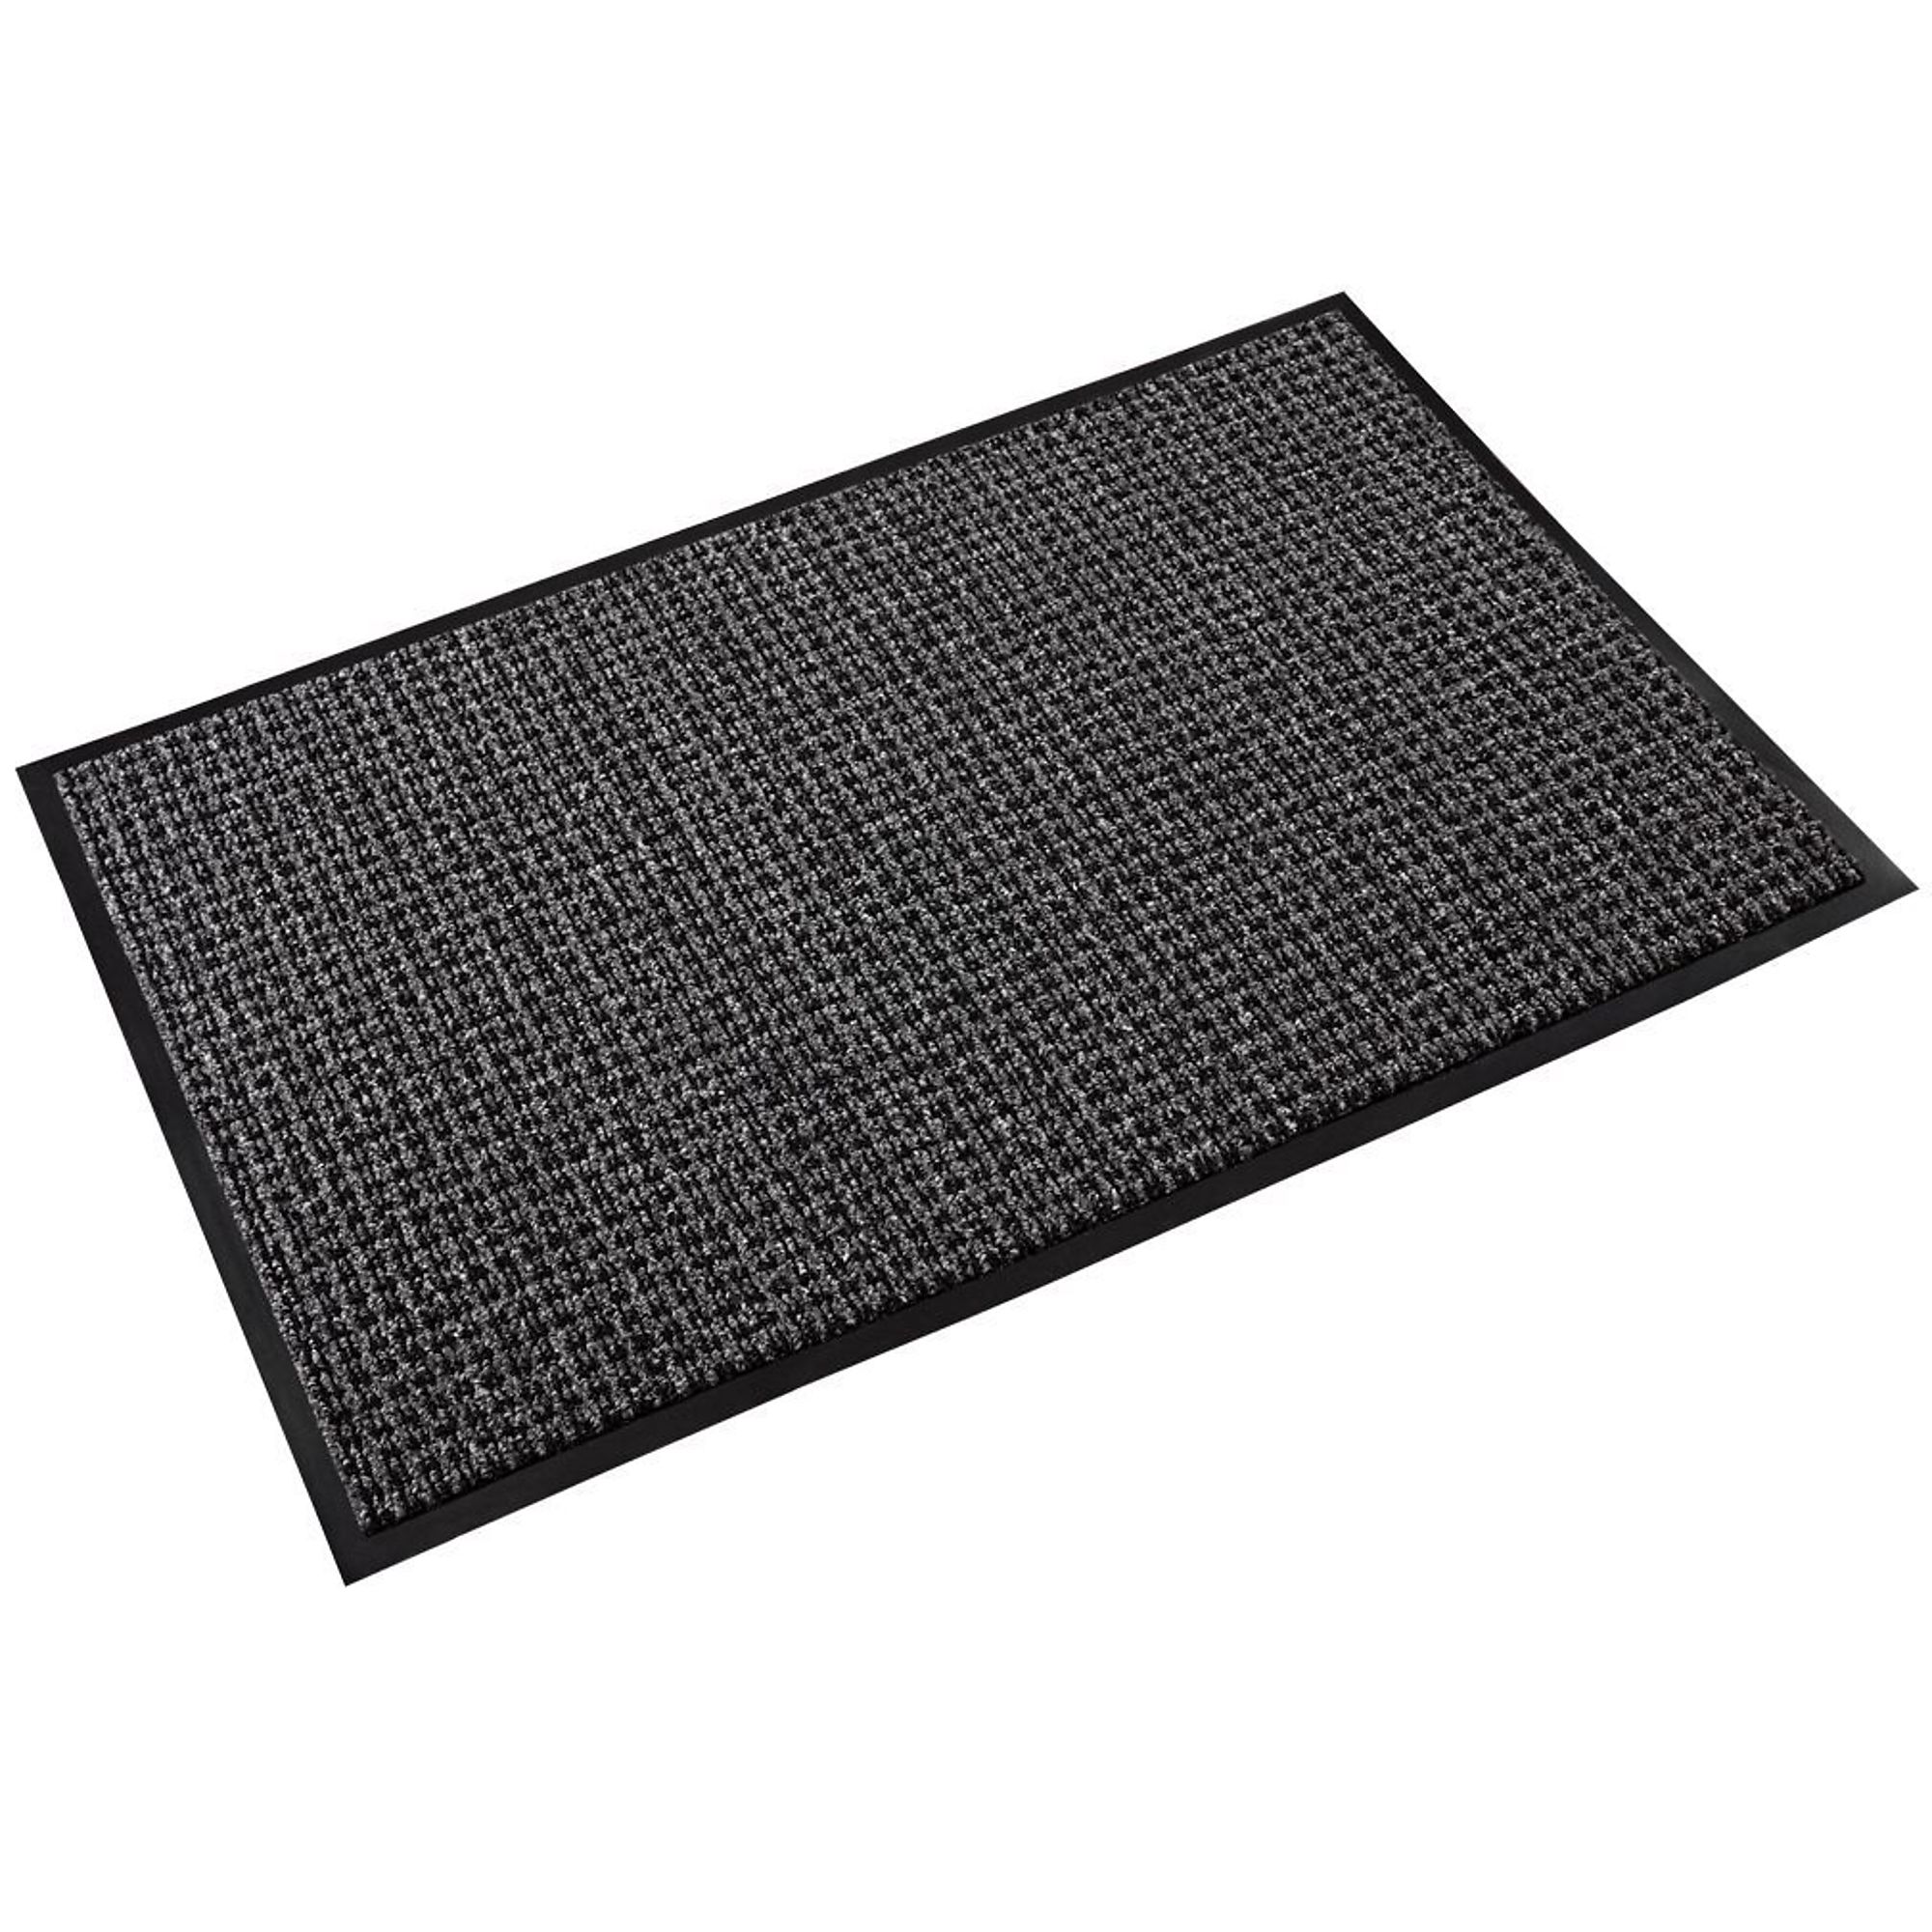 Crown Matting Technologies, Oxford Elite 4ft.x6ft. Black/Gray, Width 48 in, Length 72 in, Thickness 7/16 in, Model OE 0046GY